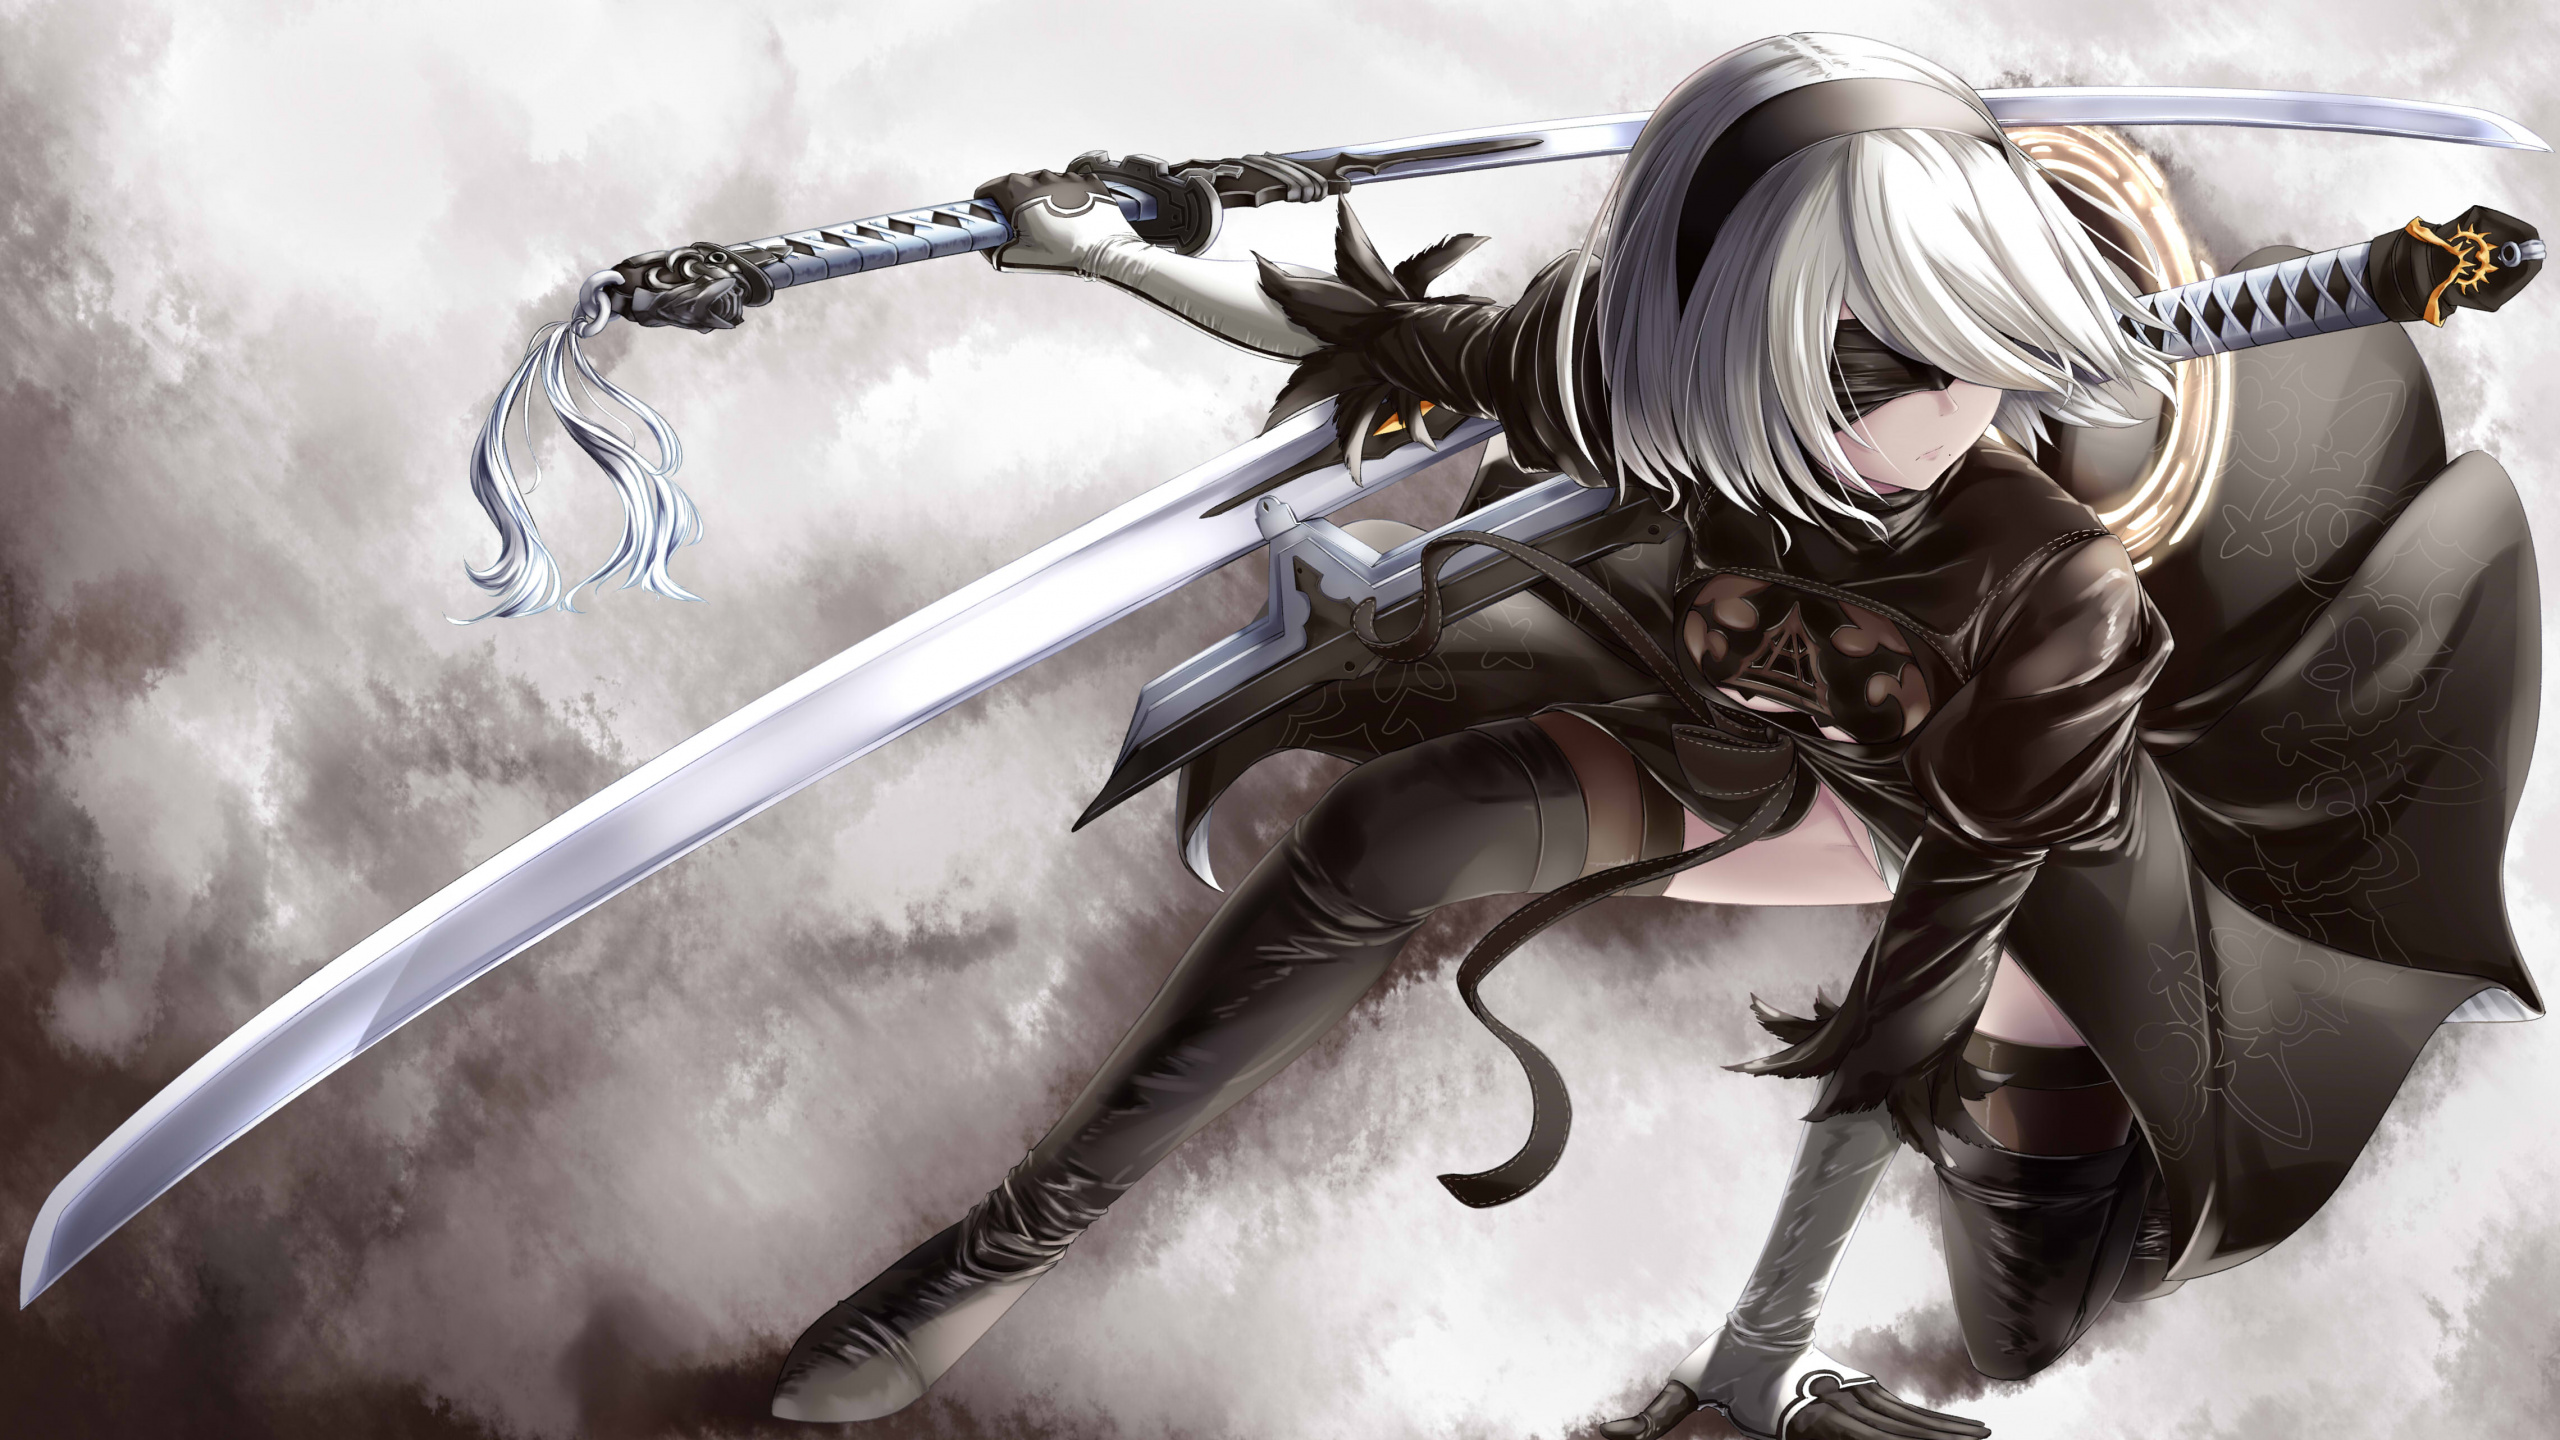 Woman in White Hair Holding Sword Anime Character. Wallpaper in 2560x1440 Resolution